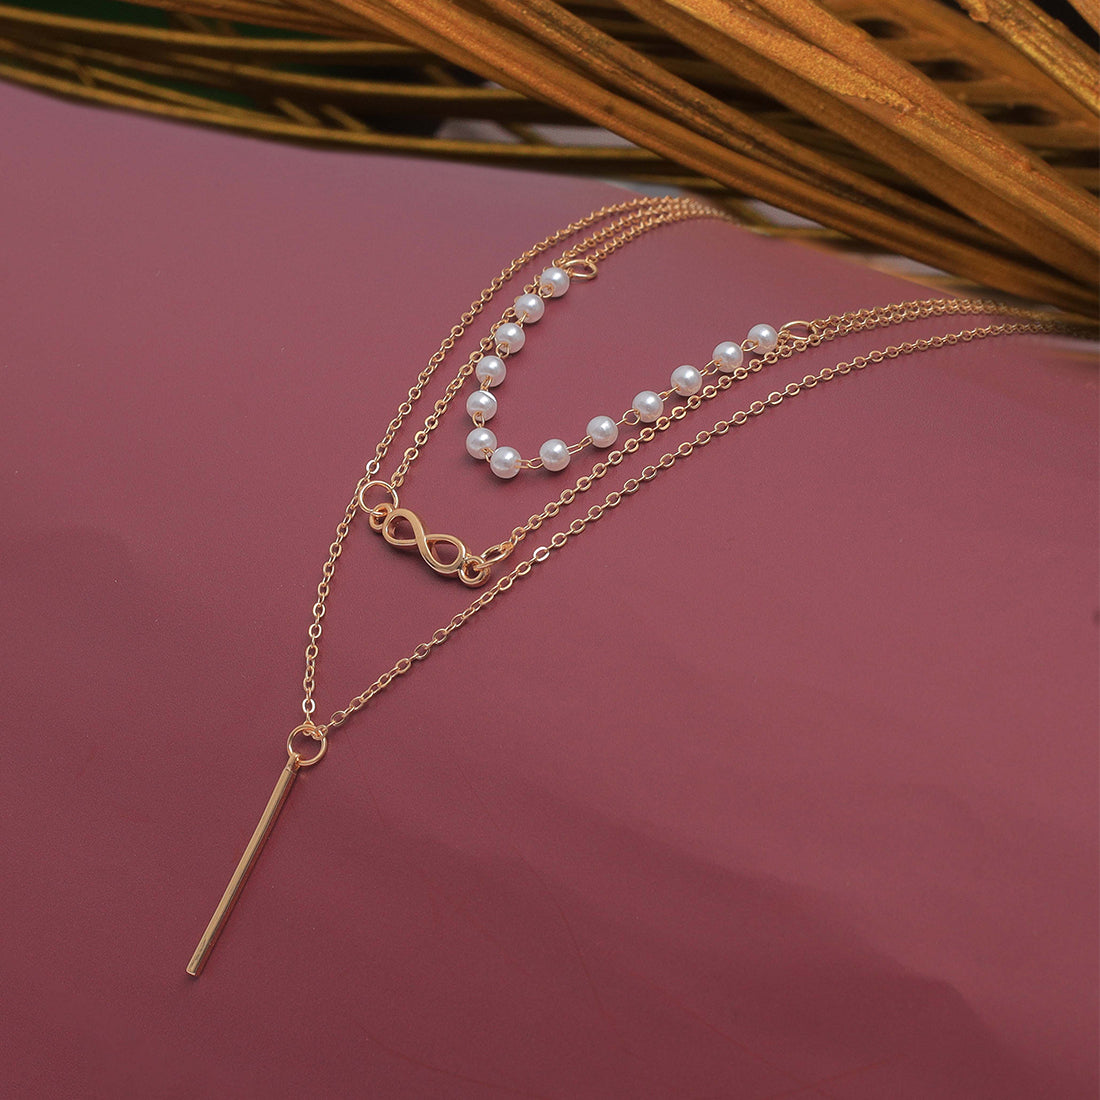 Trendy Three Layered Gold Necklace with Pearls Chain and Infinity